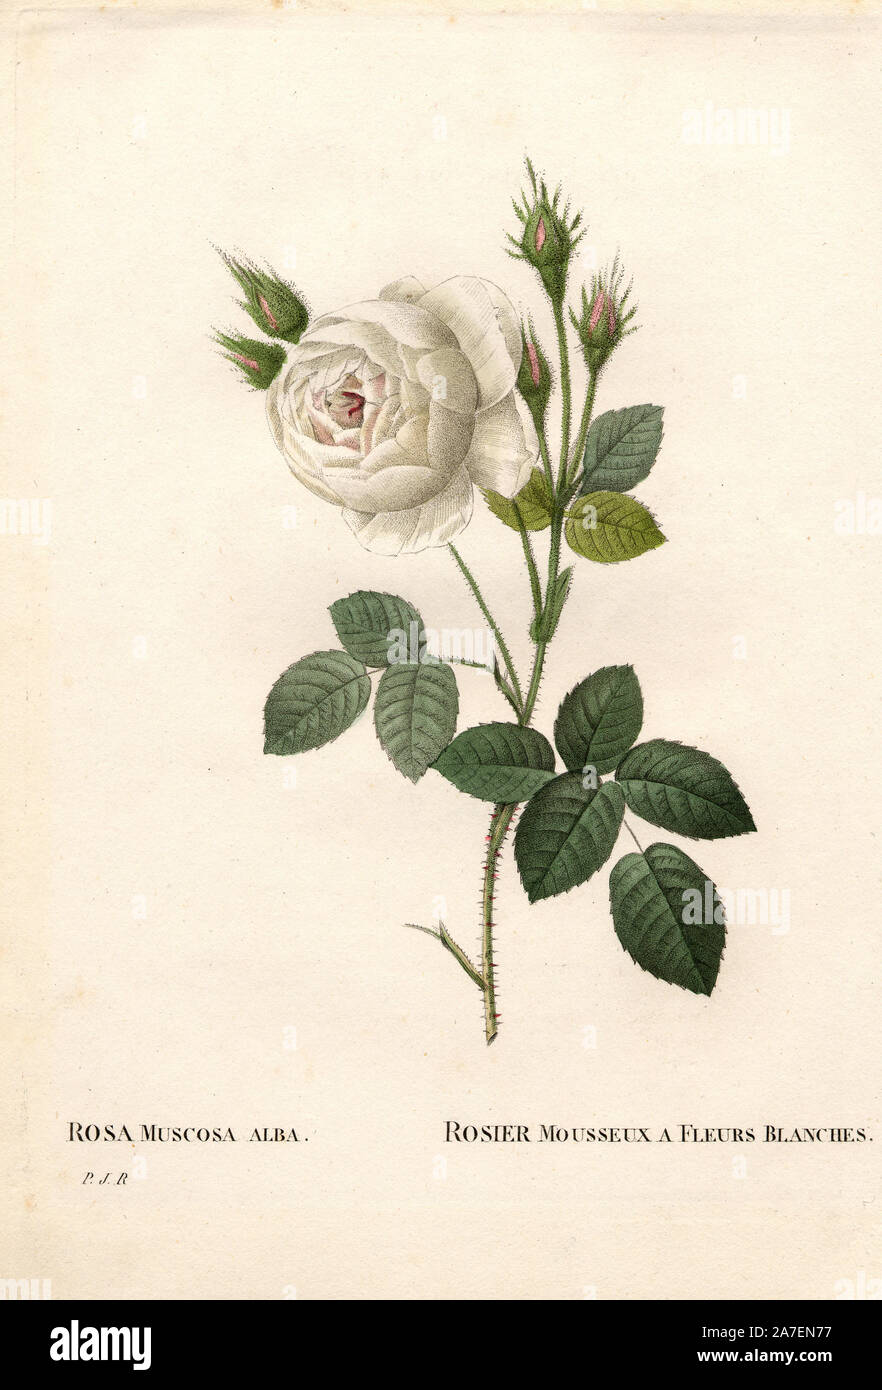 Shailer’s white moss rose, Rosa centifolia var. alba-muscosa, Rosier mousseux à fleurs blanches. Handcoloured stipple copperplate engraving from Pierre Joseph Redoute's 'Les Roses,' Paris, 1828. Redoute was botanical artist to Marie Antoinette and Empress Josephine. He painted over 170 watercolours of roses from the gardens of Malmaison. Stock Photo